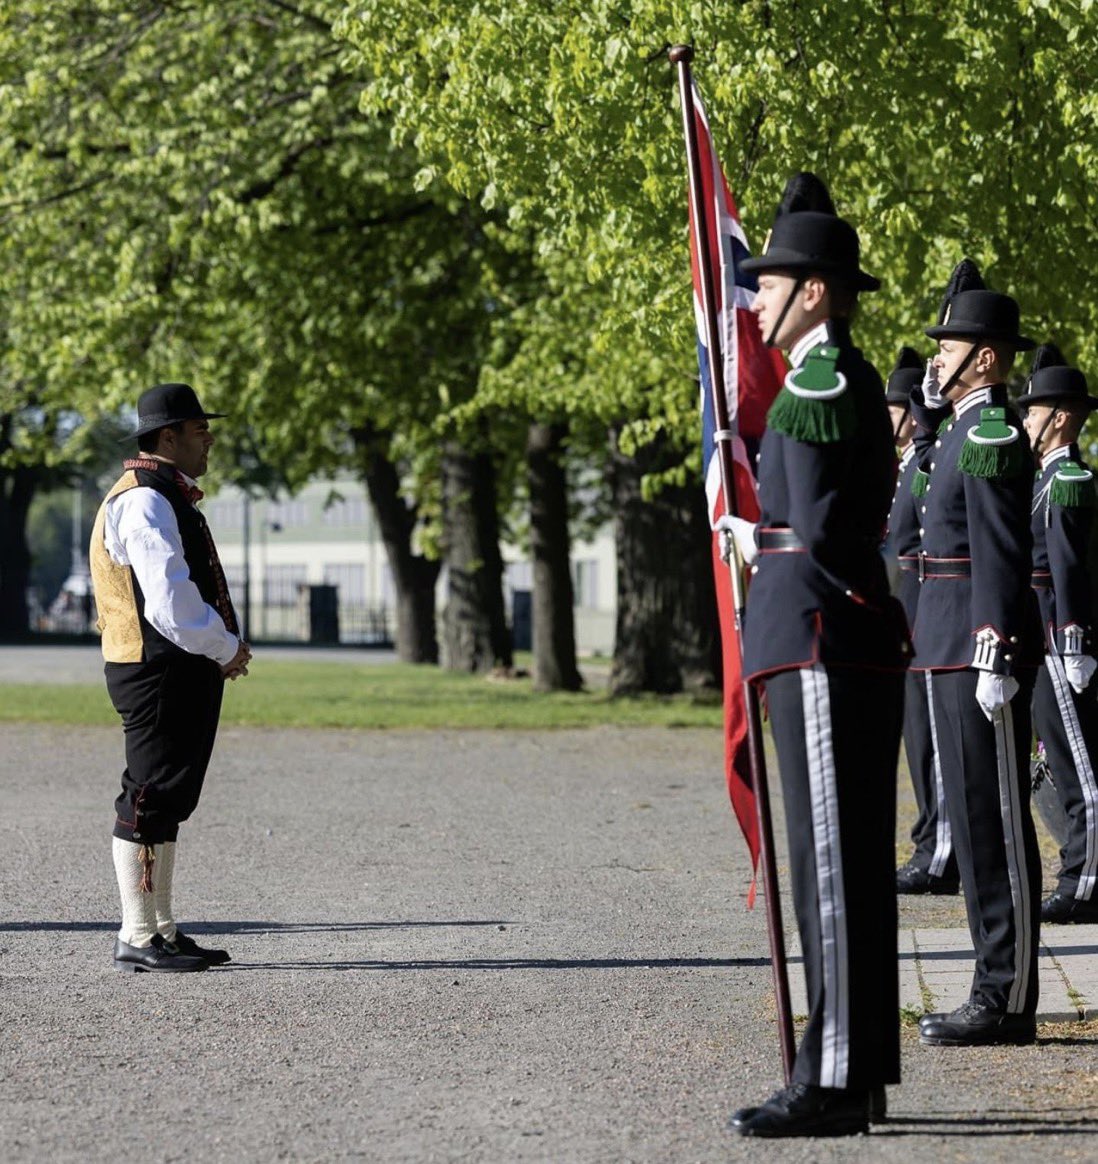 The diversity-hired-President of the Norwegian Parliament standing in front of Norwegian guards. A picture is worth a thousand words.